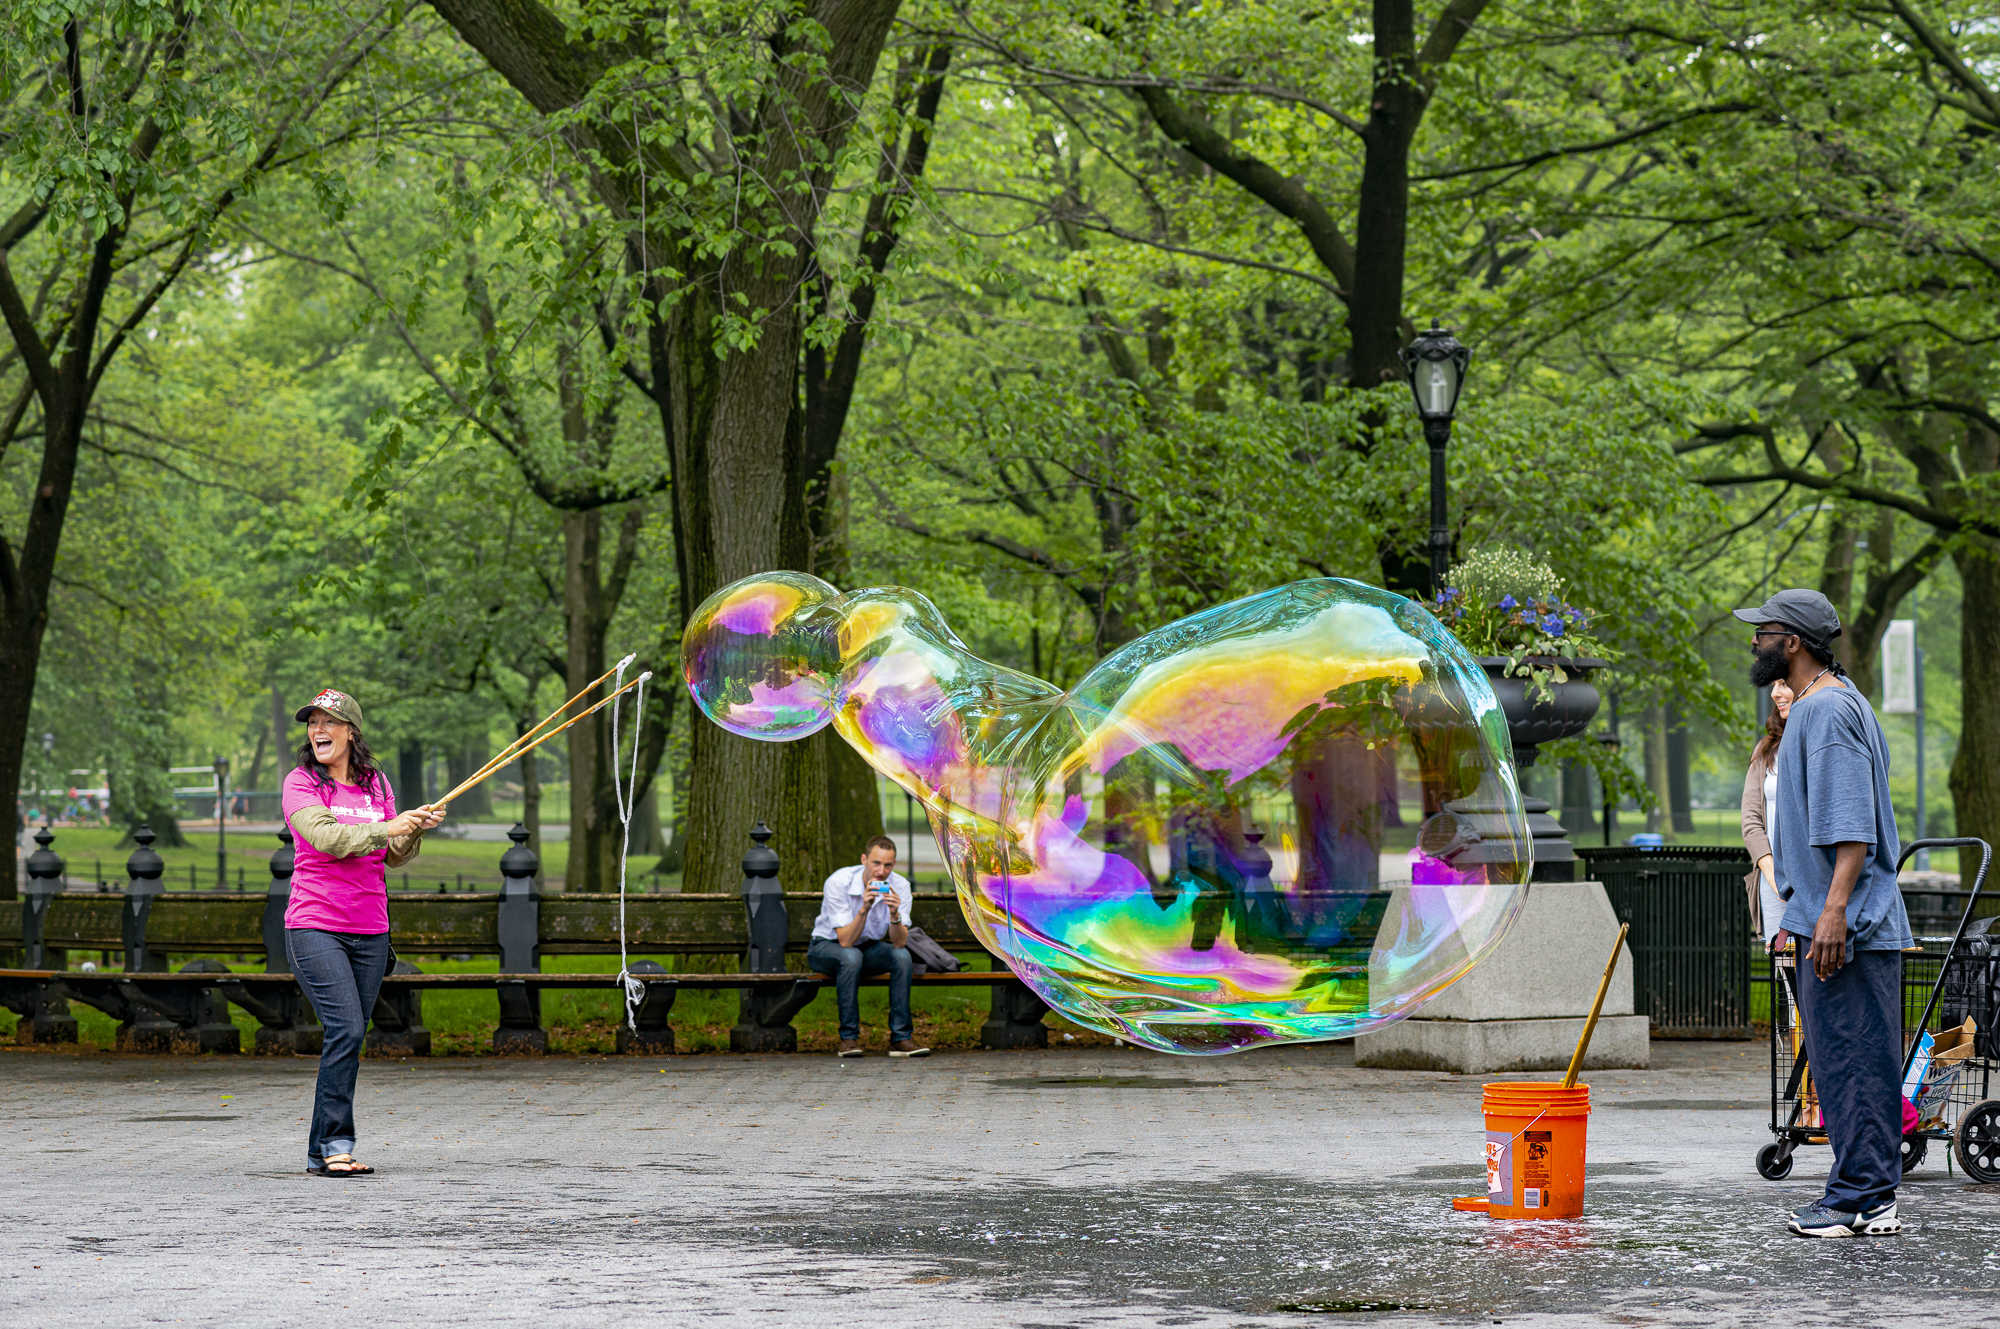 “How About this Bubble?!”, 2012, Central Park, New York